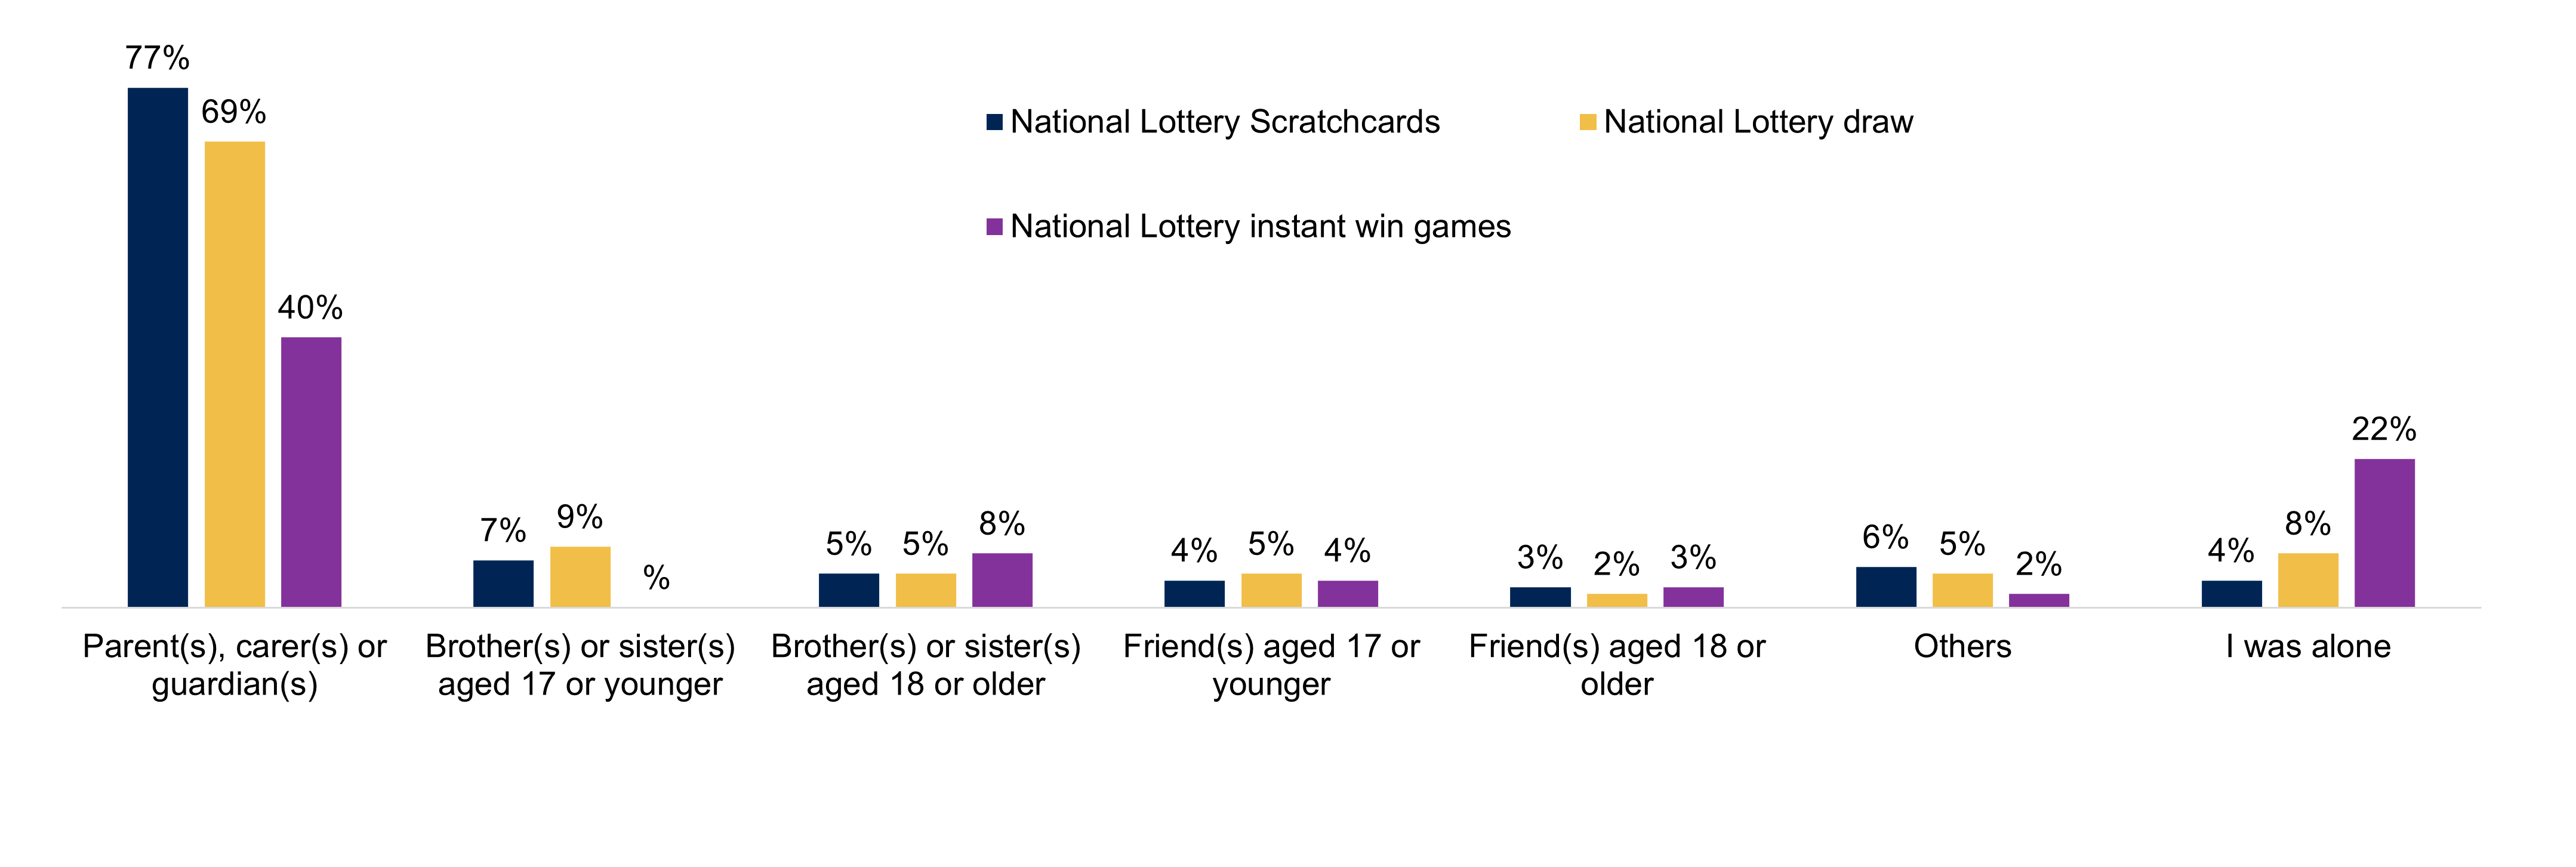 A bar chart showing who young people were with when playing National Lottery products, from 'Parent(s), carer(s) or guardian(s)' to 'I was alone'. For each group of people there are three bars. One bar represents those young people who participated in National Lottery scratchcards, another bar represents those young people who participated in a National Lottery draws, and the other bar represents those young people who participated in National Lottery instant win games. Data from the chart is provided within the following table.